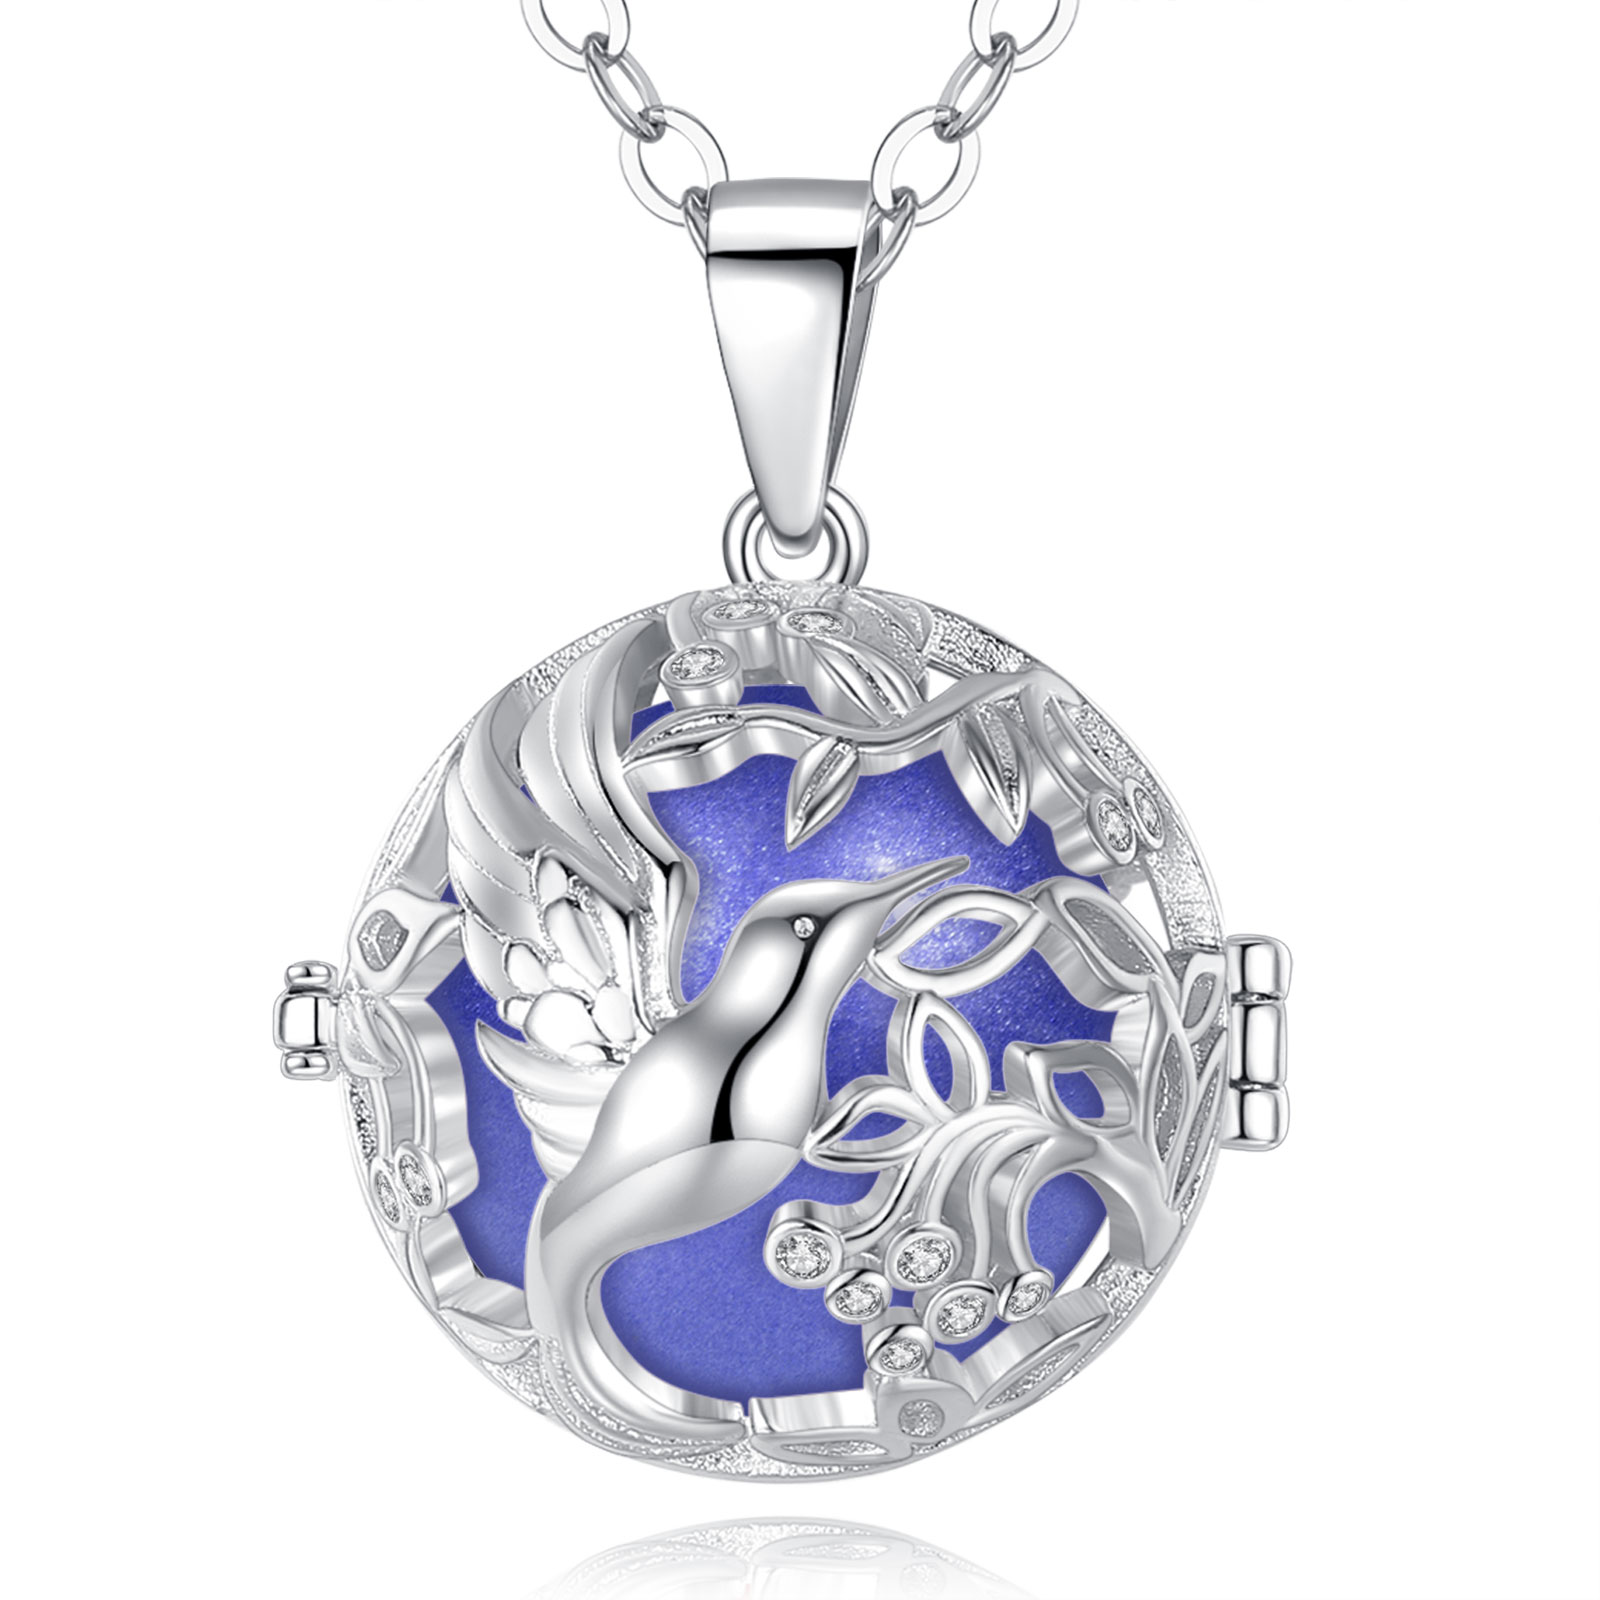 Merryshine Jewelry Hummingbird Design Hollow Out Harmony Cage Pregnant Pendant Necklace